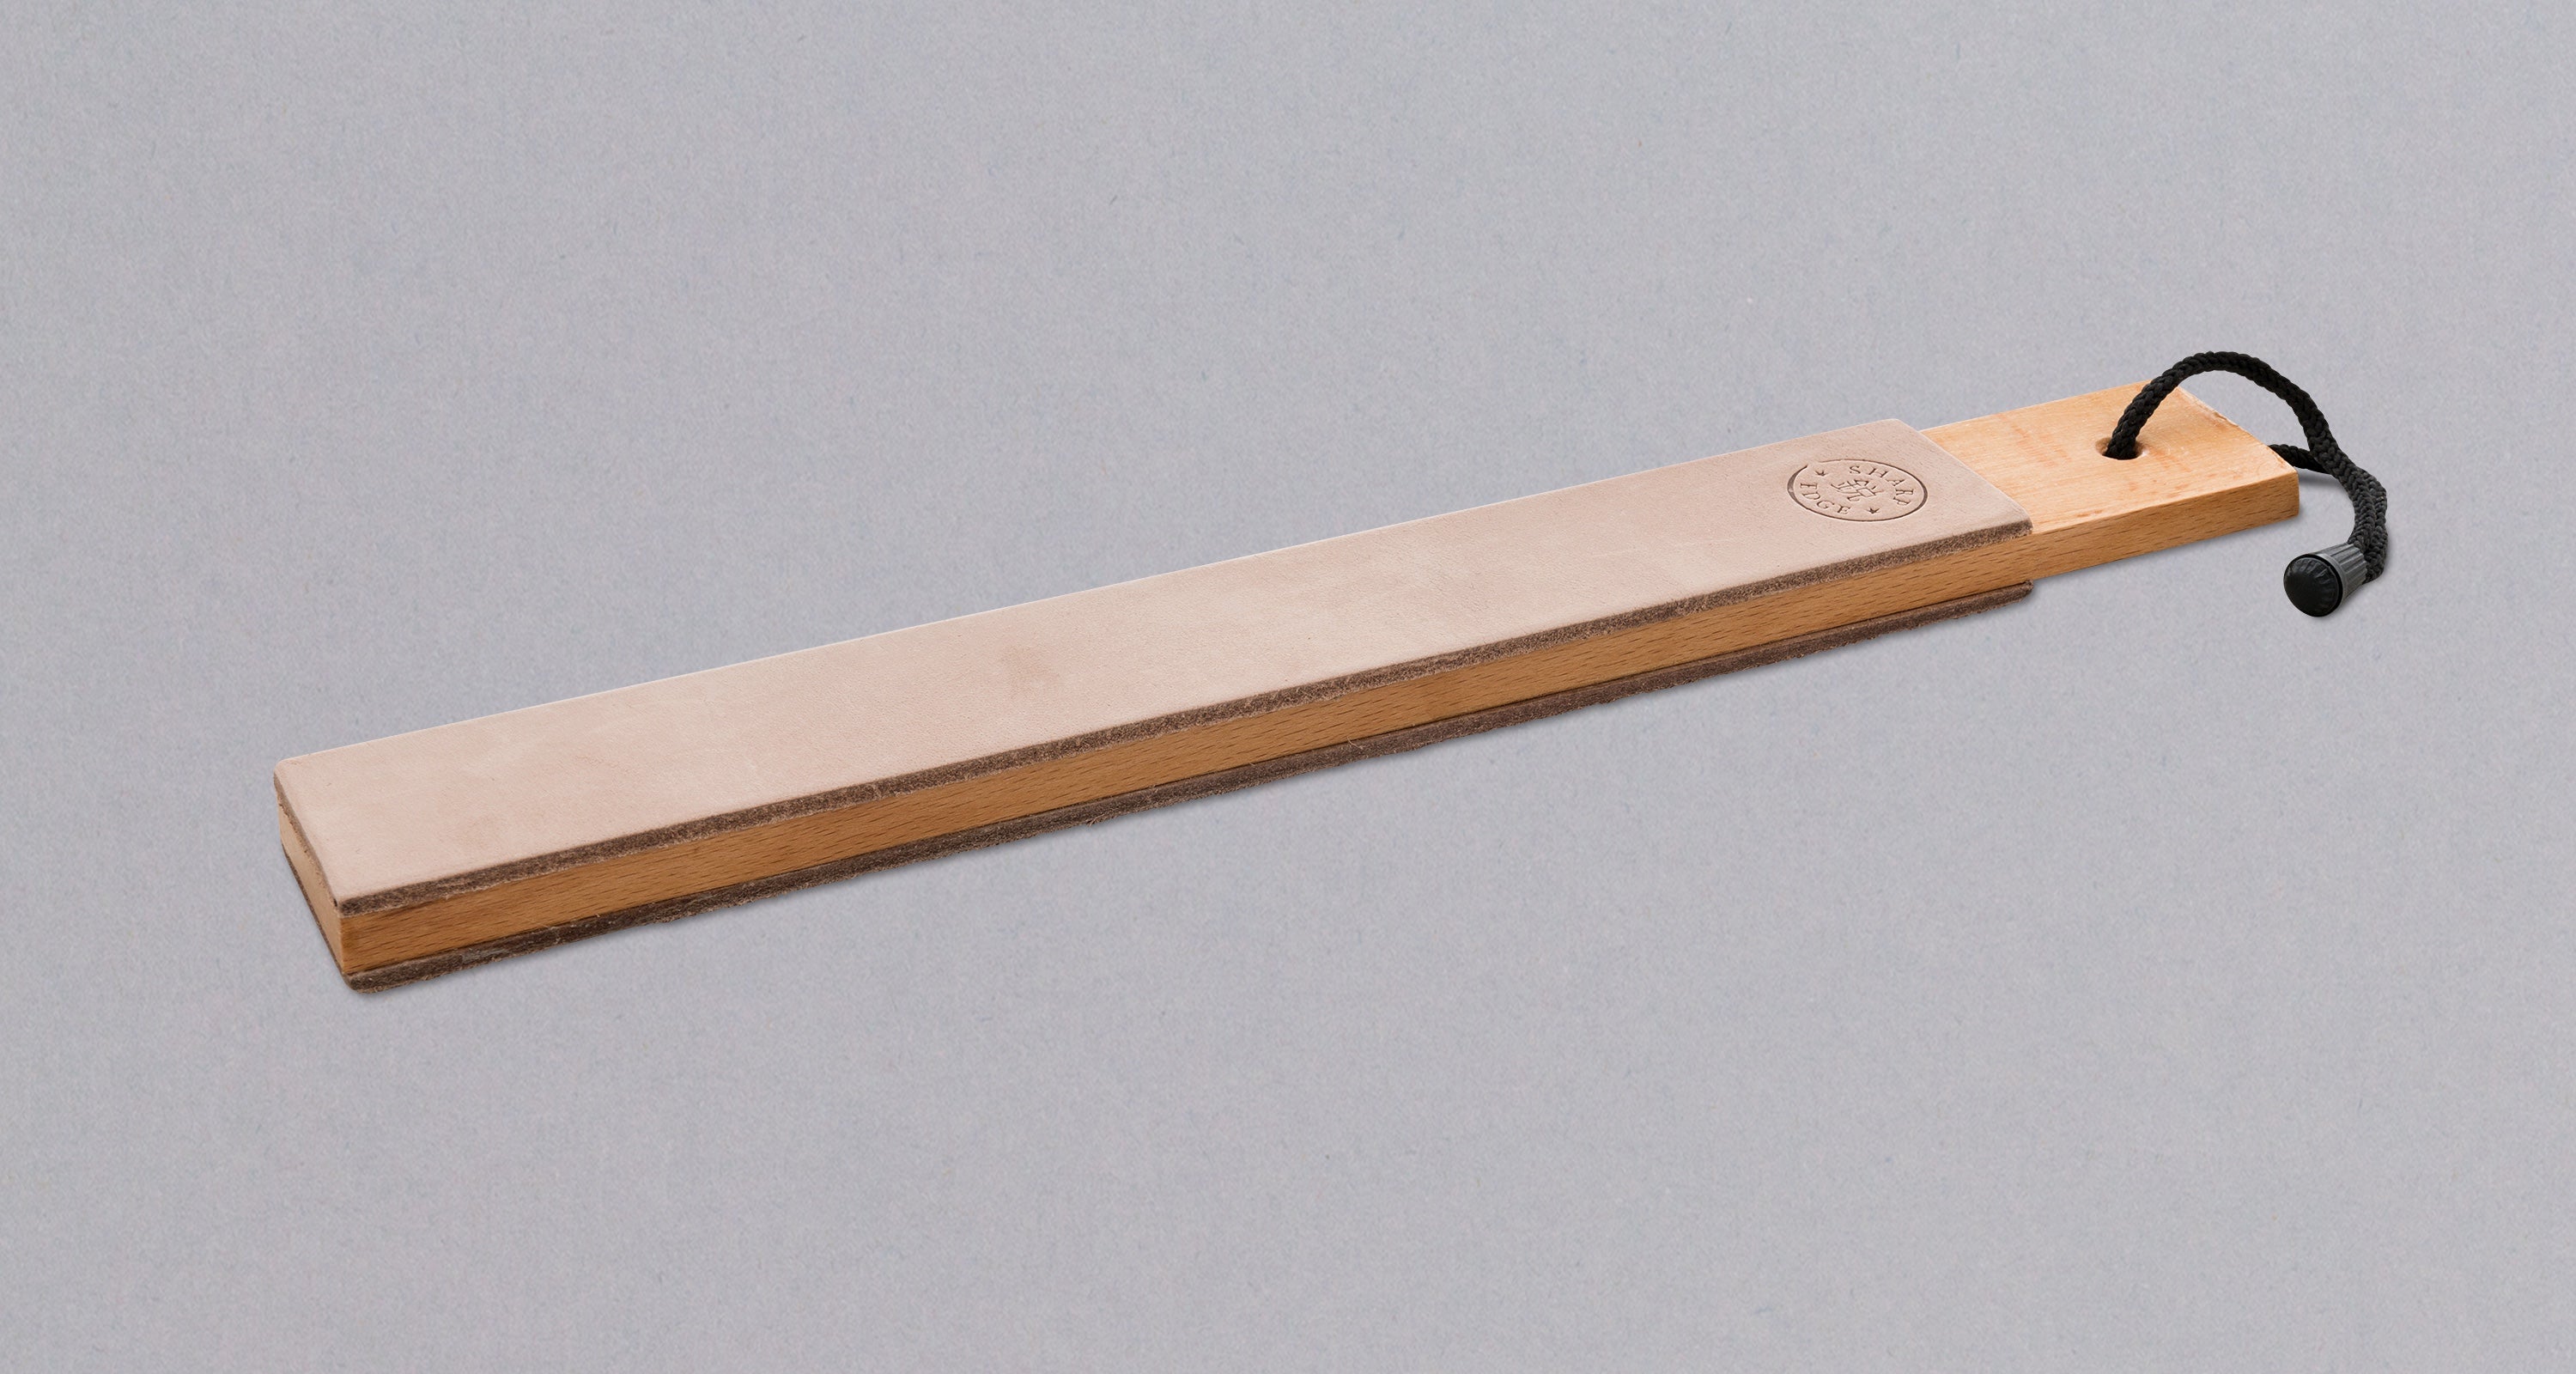 Double Sided Leather Strop Hone for Maintaining Convex Grind Knives